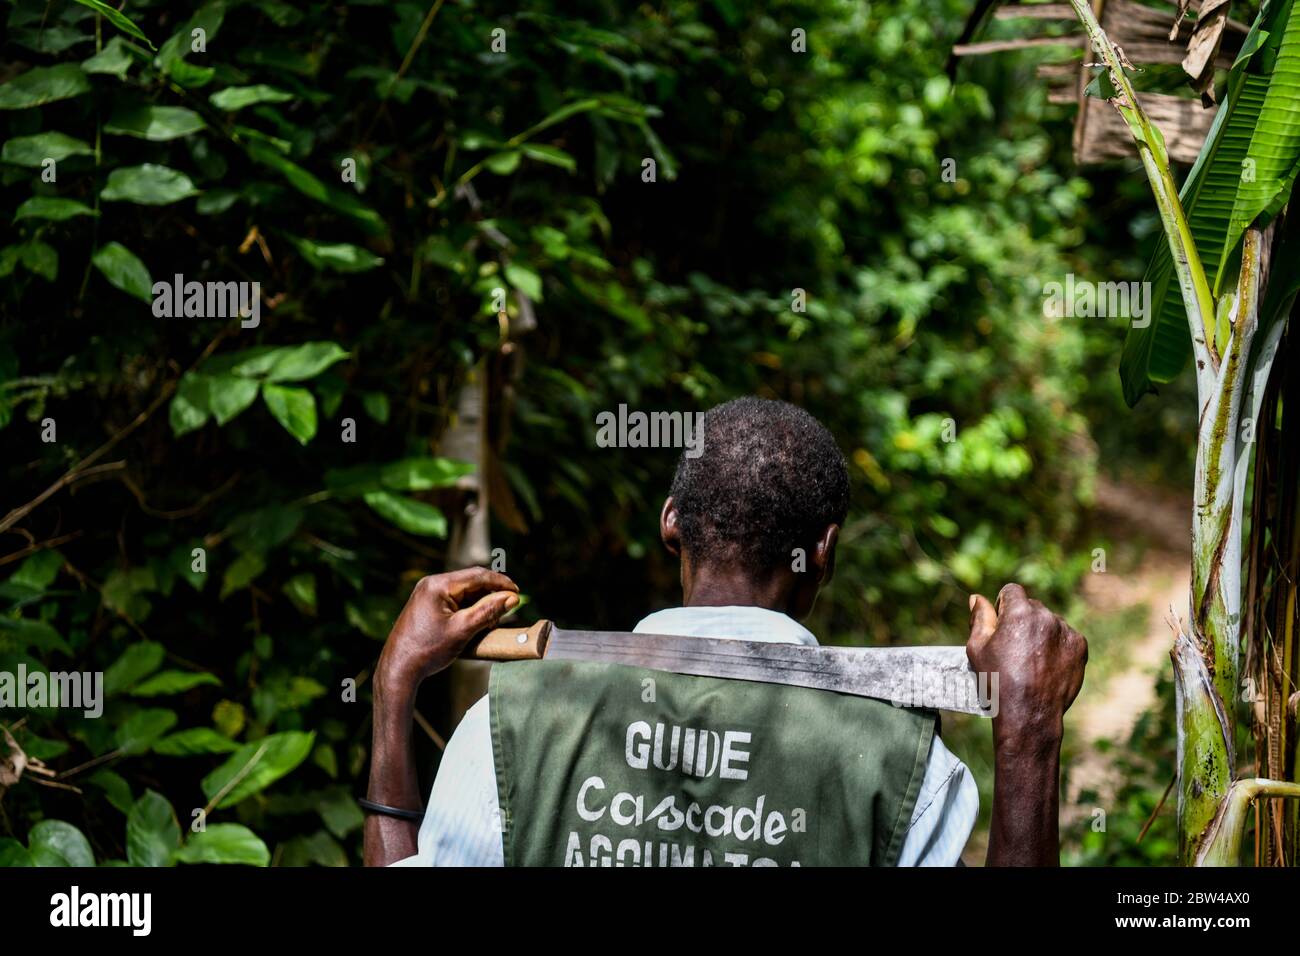 Africa, West Africa, Ghana, Wli Falls. The guide leads the way through the jungle to the Wli Falls in the middle of the mountain. Stock Photo